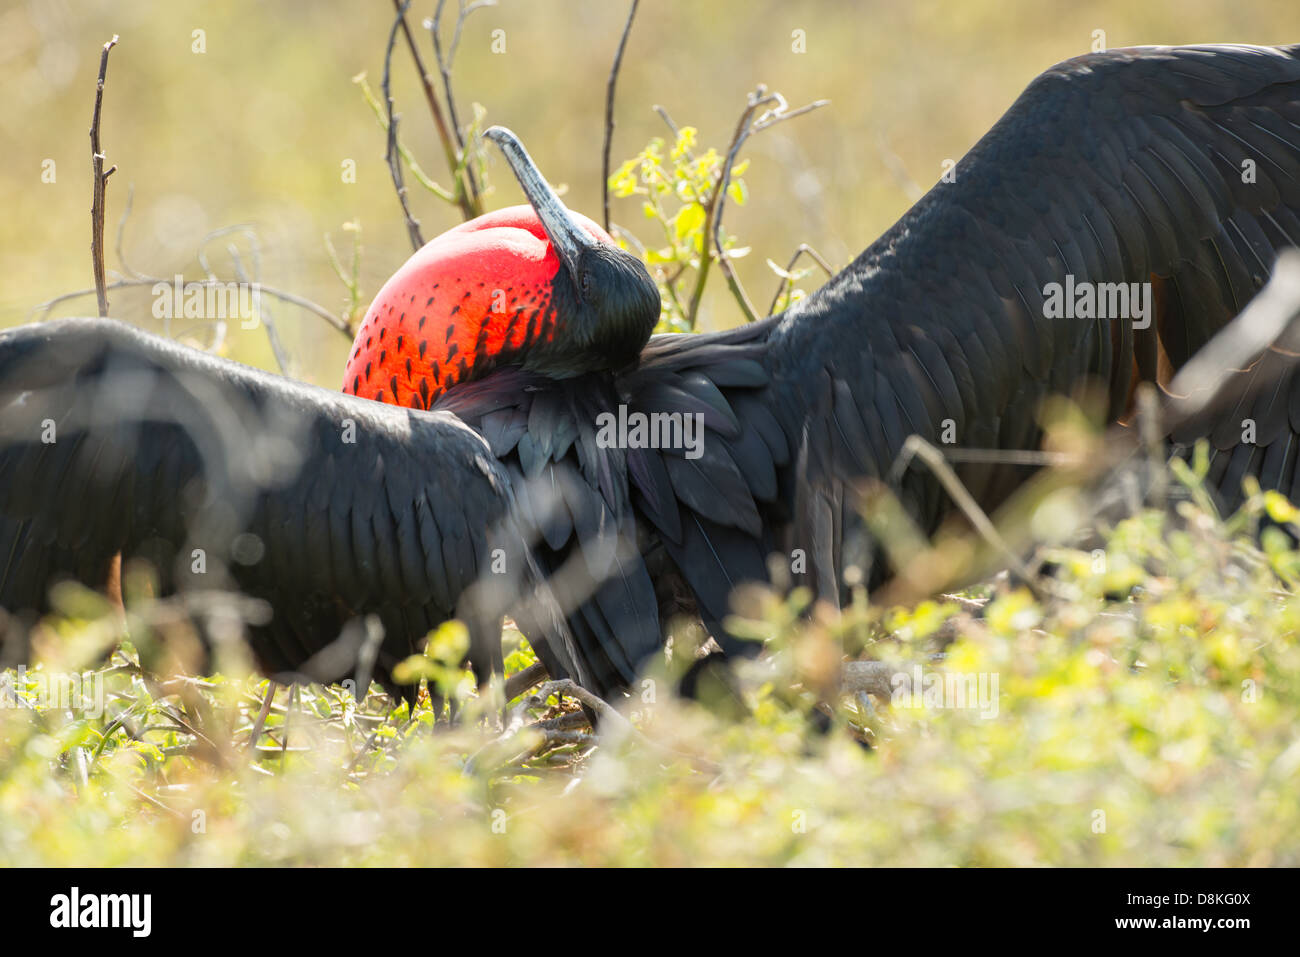 stock photo of a male magnificent frigate bird in breeding display on Espanola Island, Galapagos Stock Photo